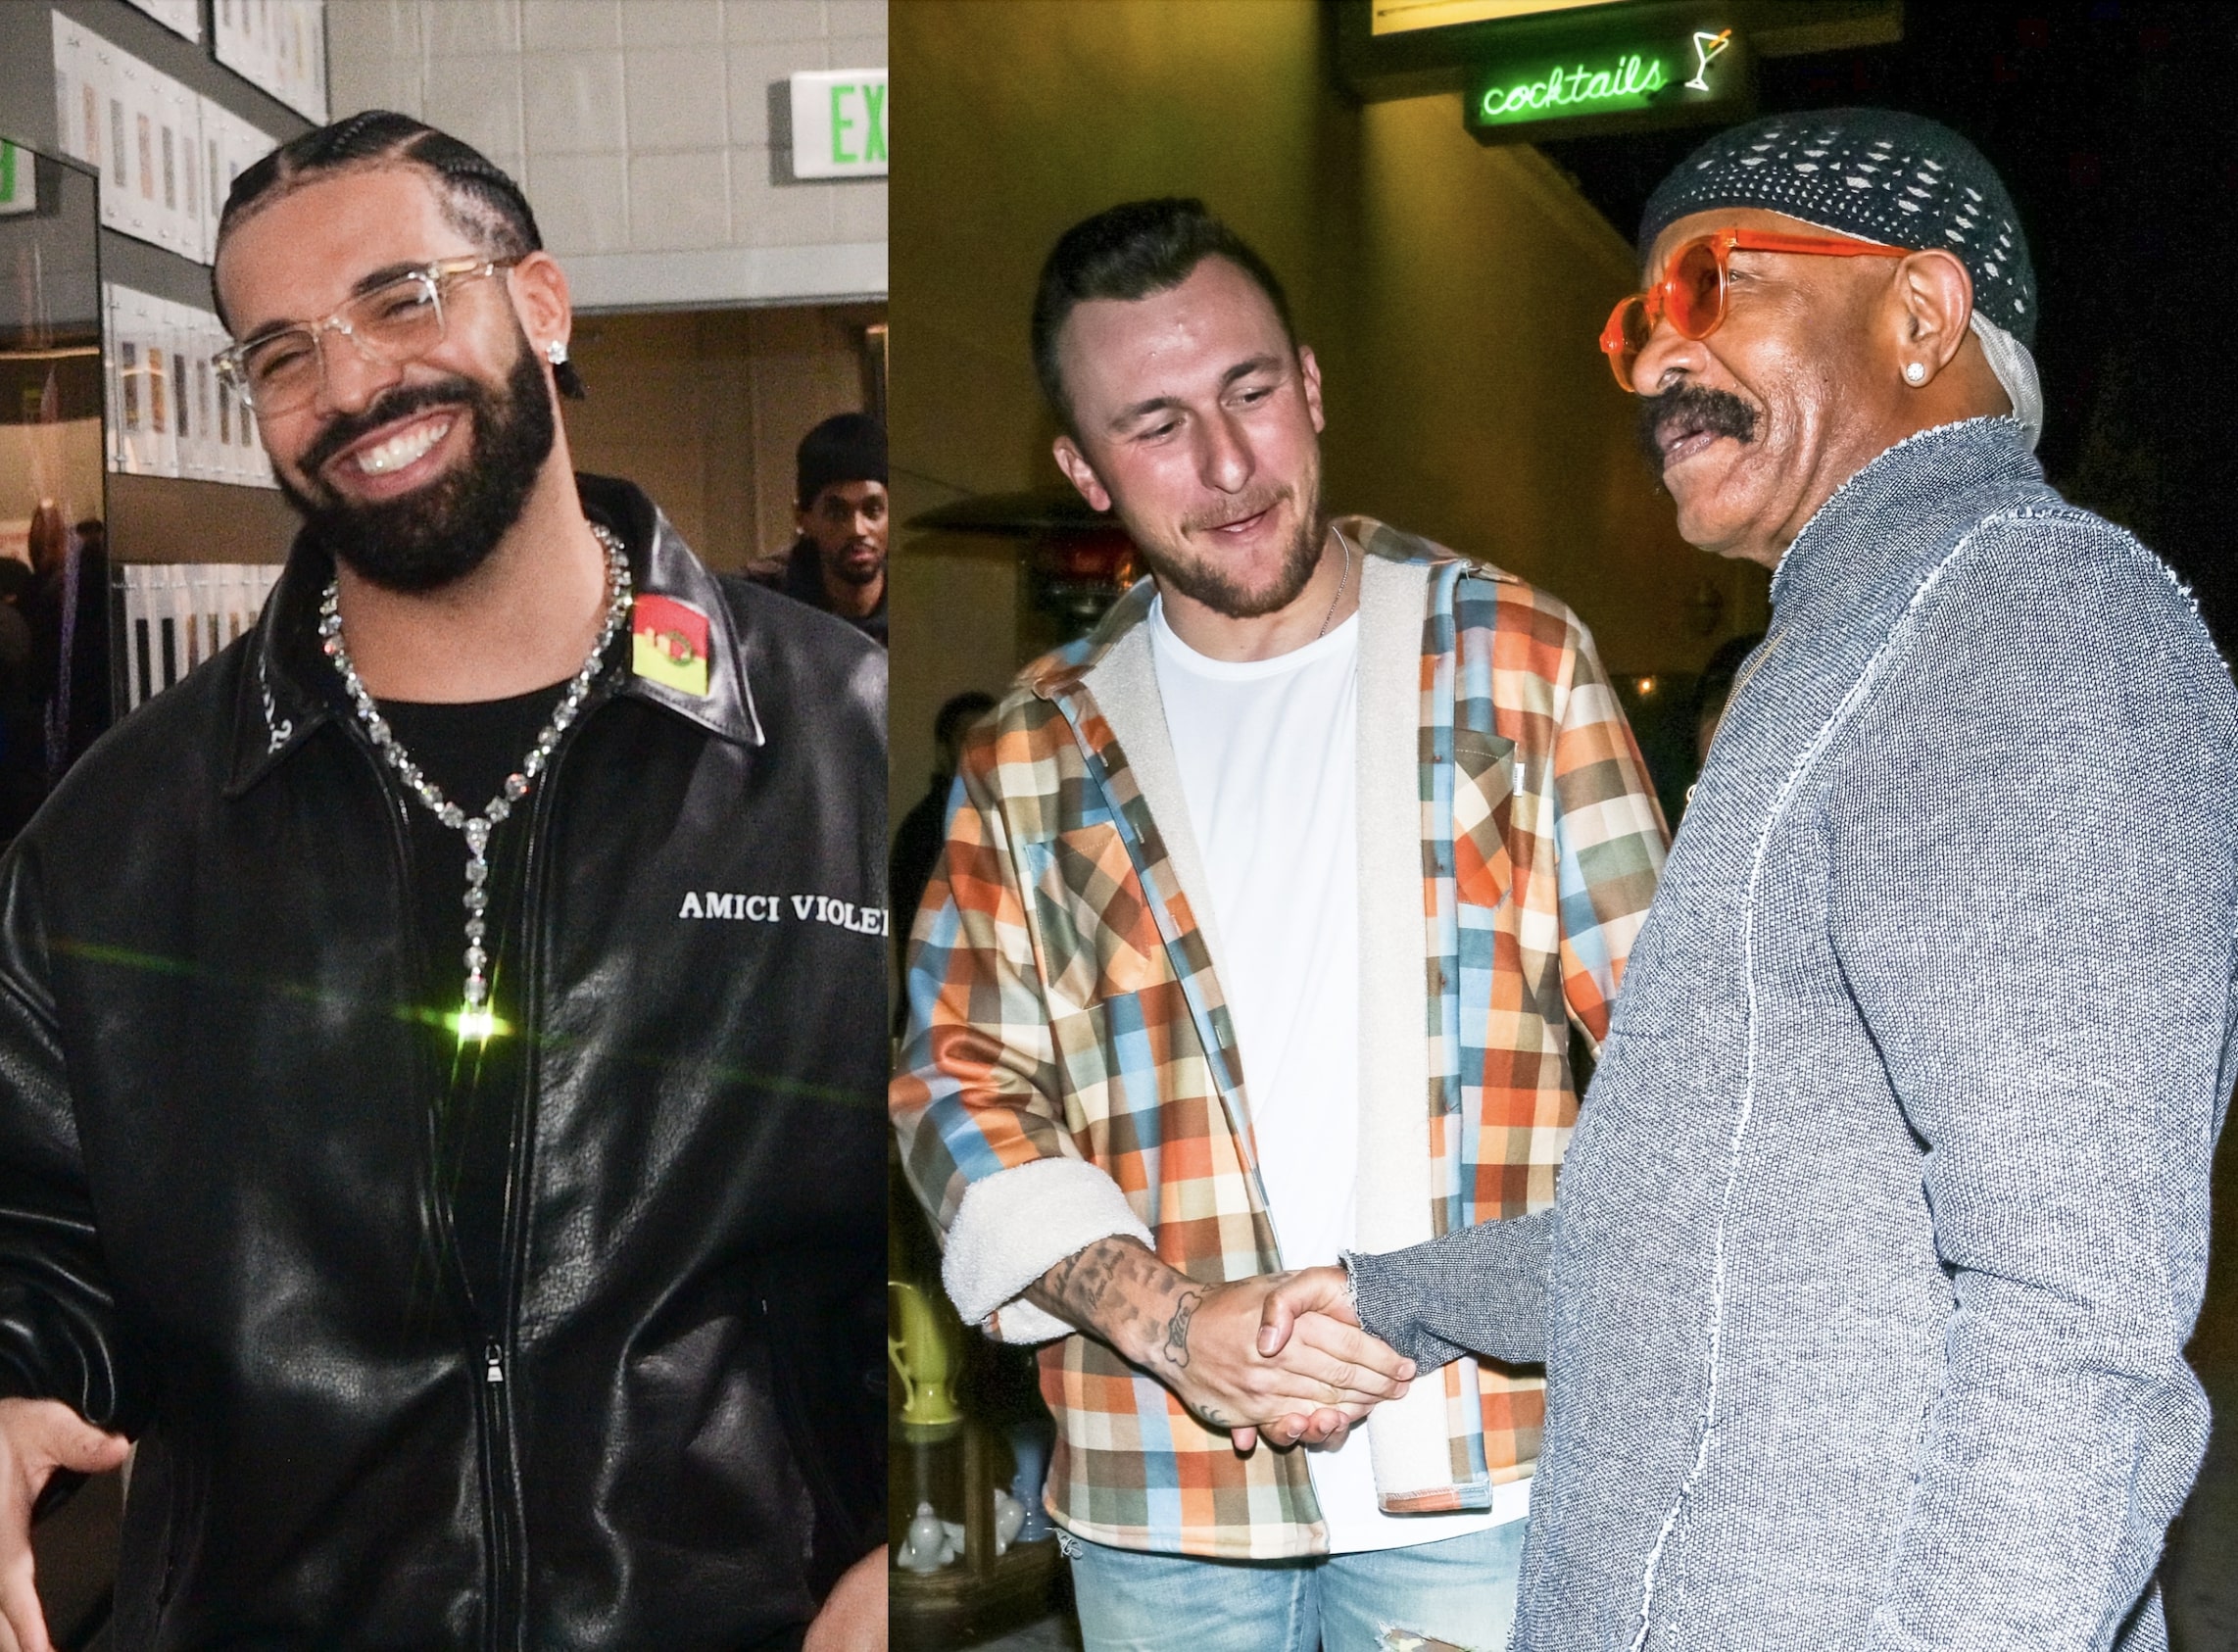 Johnny Manziel & Drake’s “It’s All A Blur” Tour Walkout In Houston Had The Crowd Going Wild